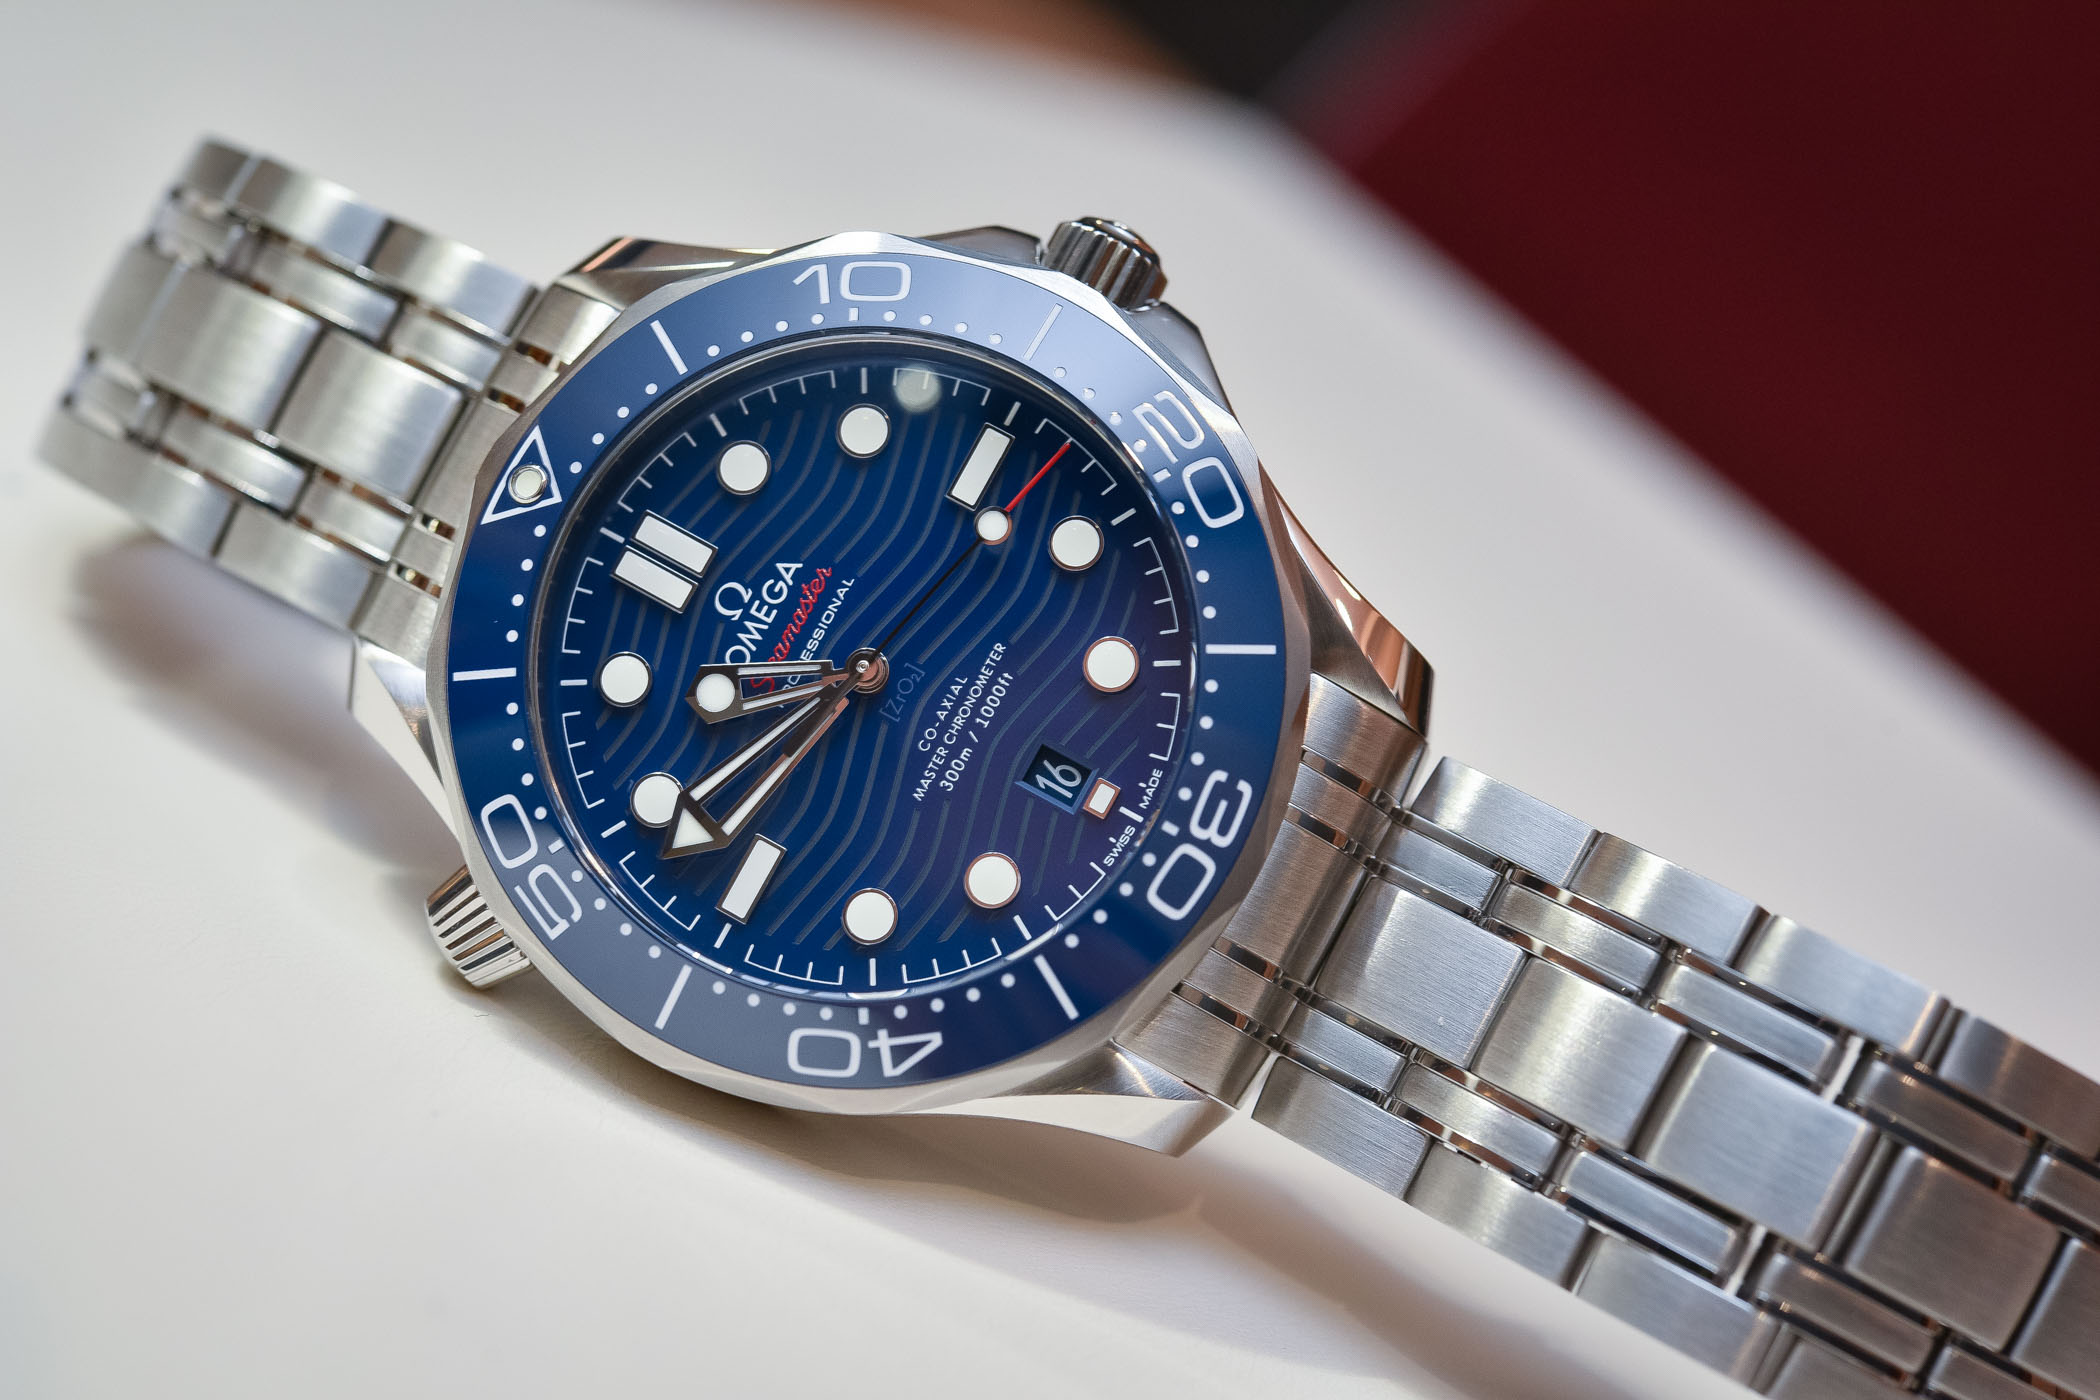 omega seamaster diver 300 review